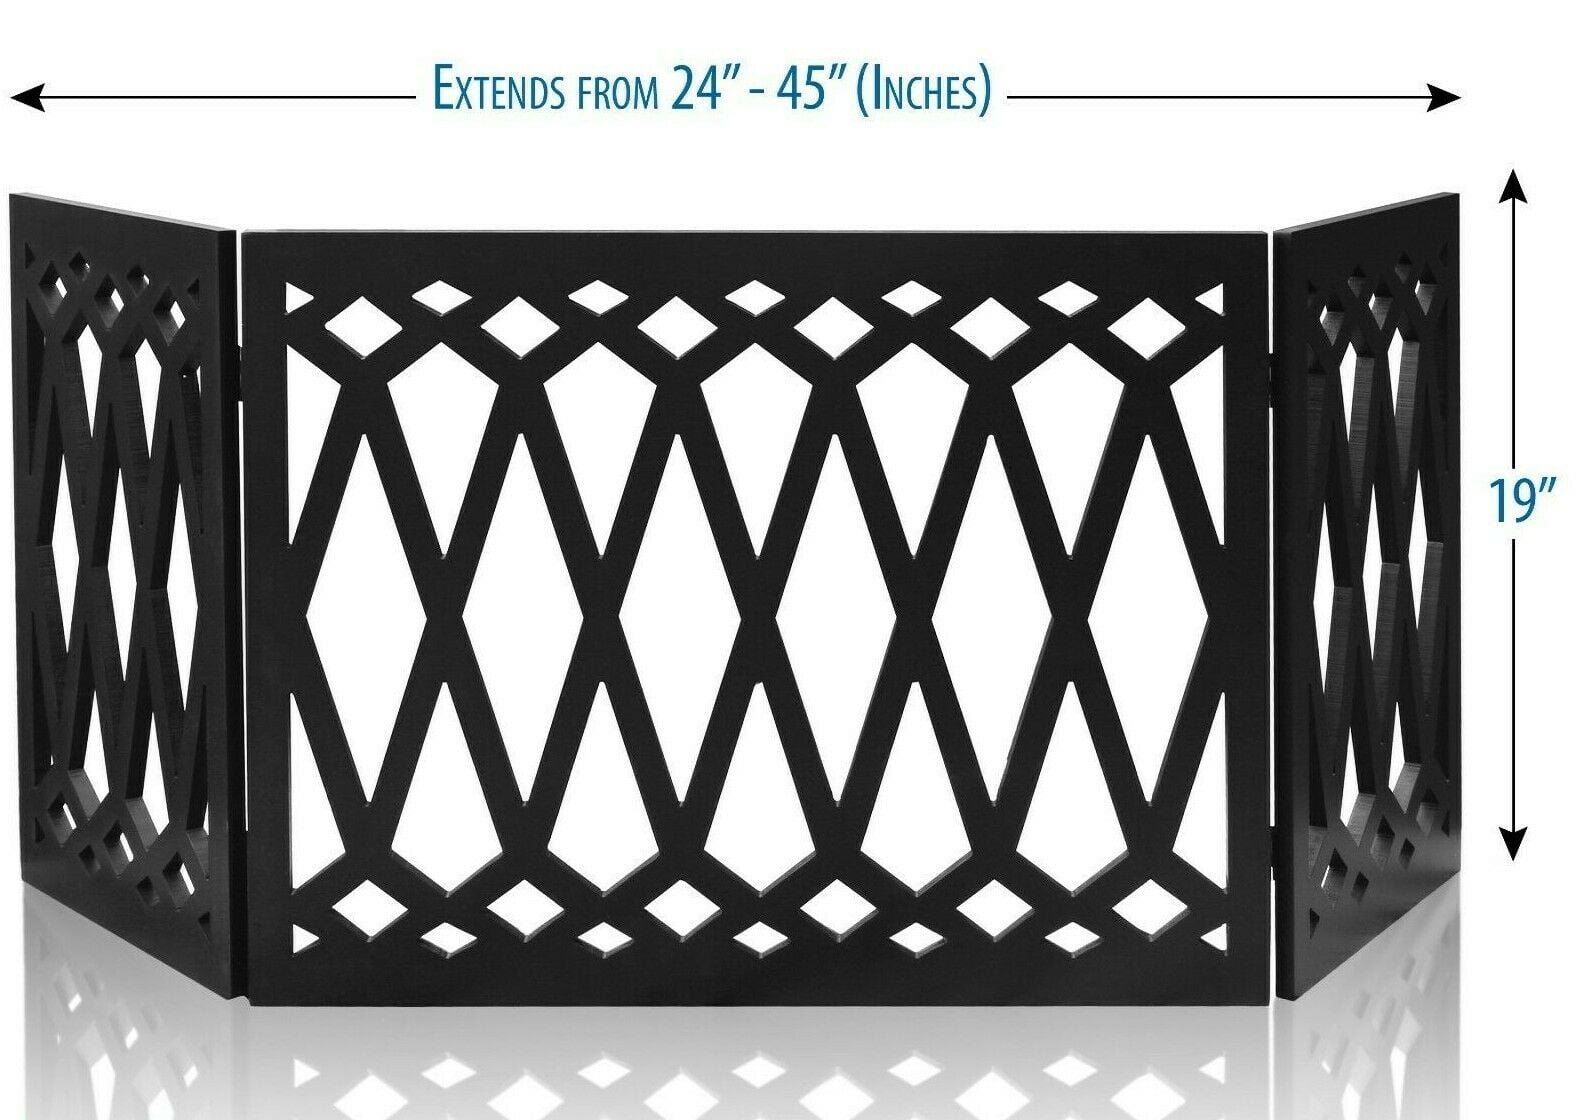 Doorways Trellis - White & Hallways Barrier for Stairs Bundaloo Freestanding Dog Gate Expandable Decorative Wooden Fence for Small to Medium Pet Dogs 